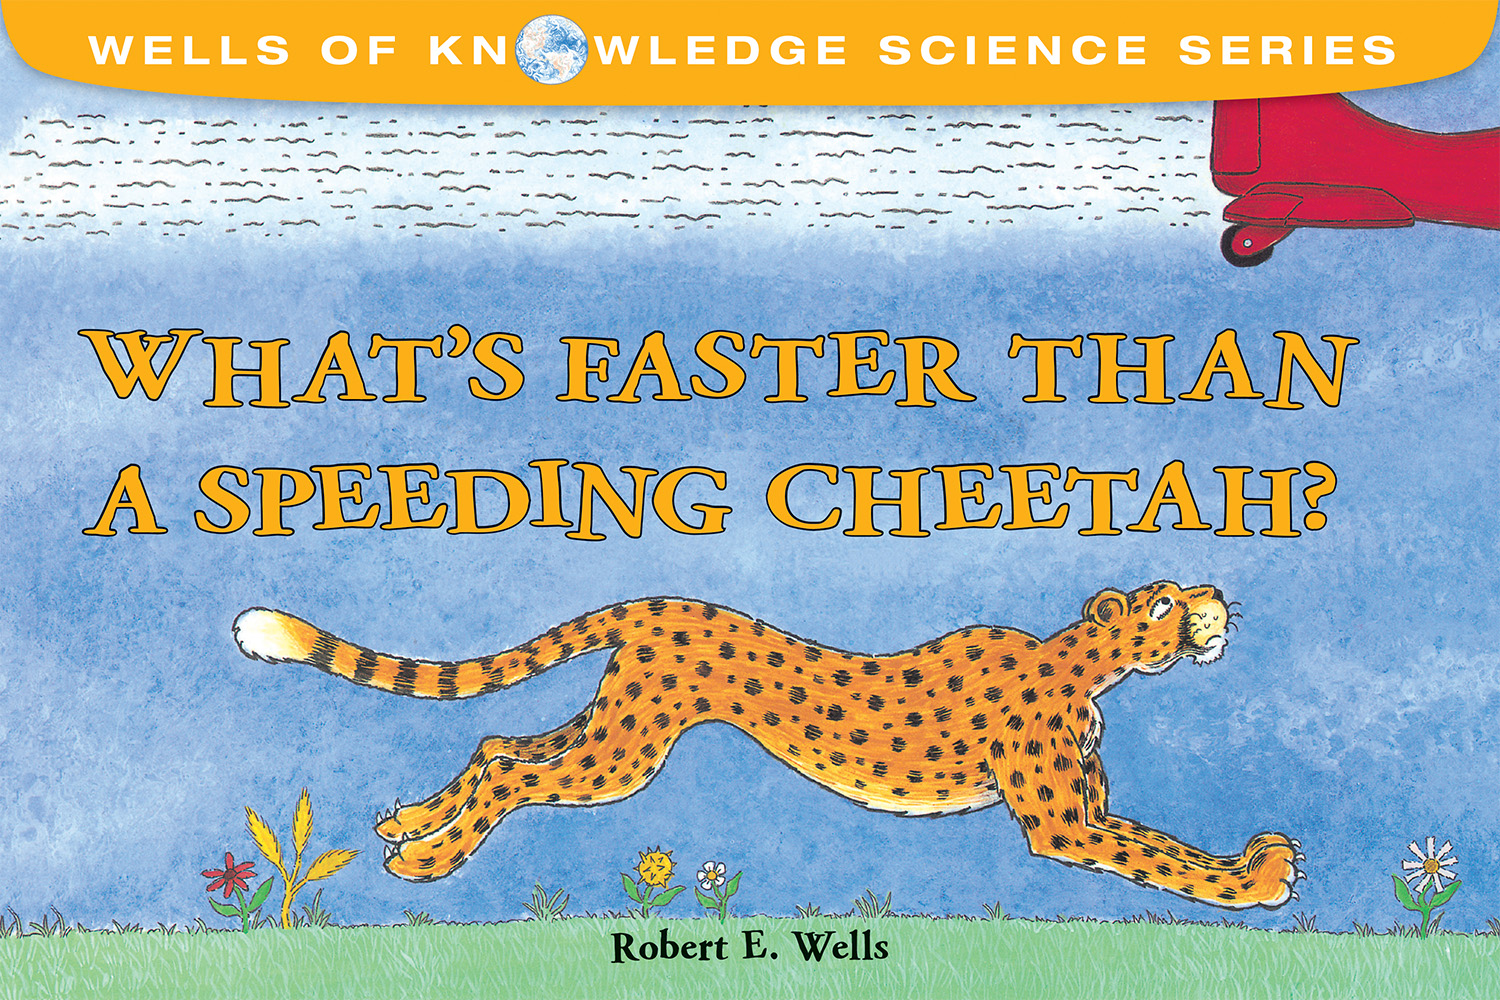 What is faster than a cheetah?